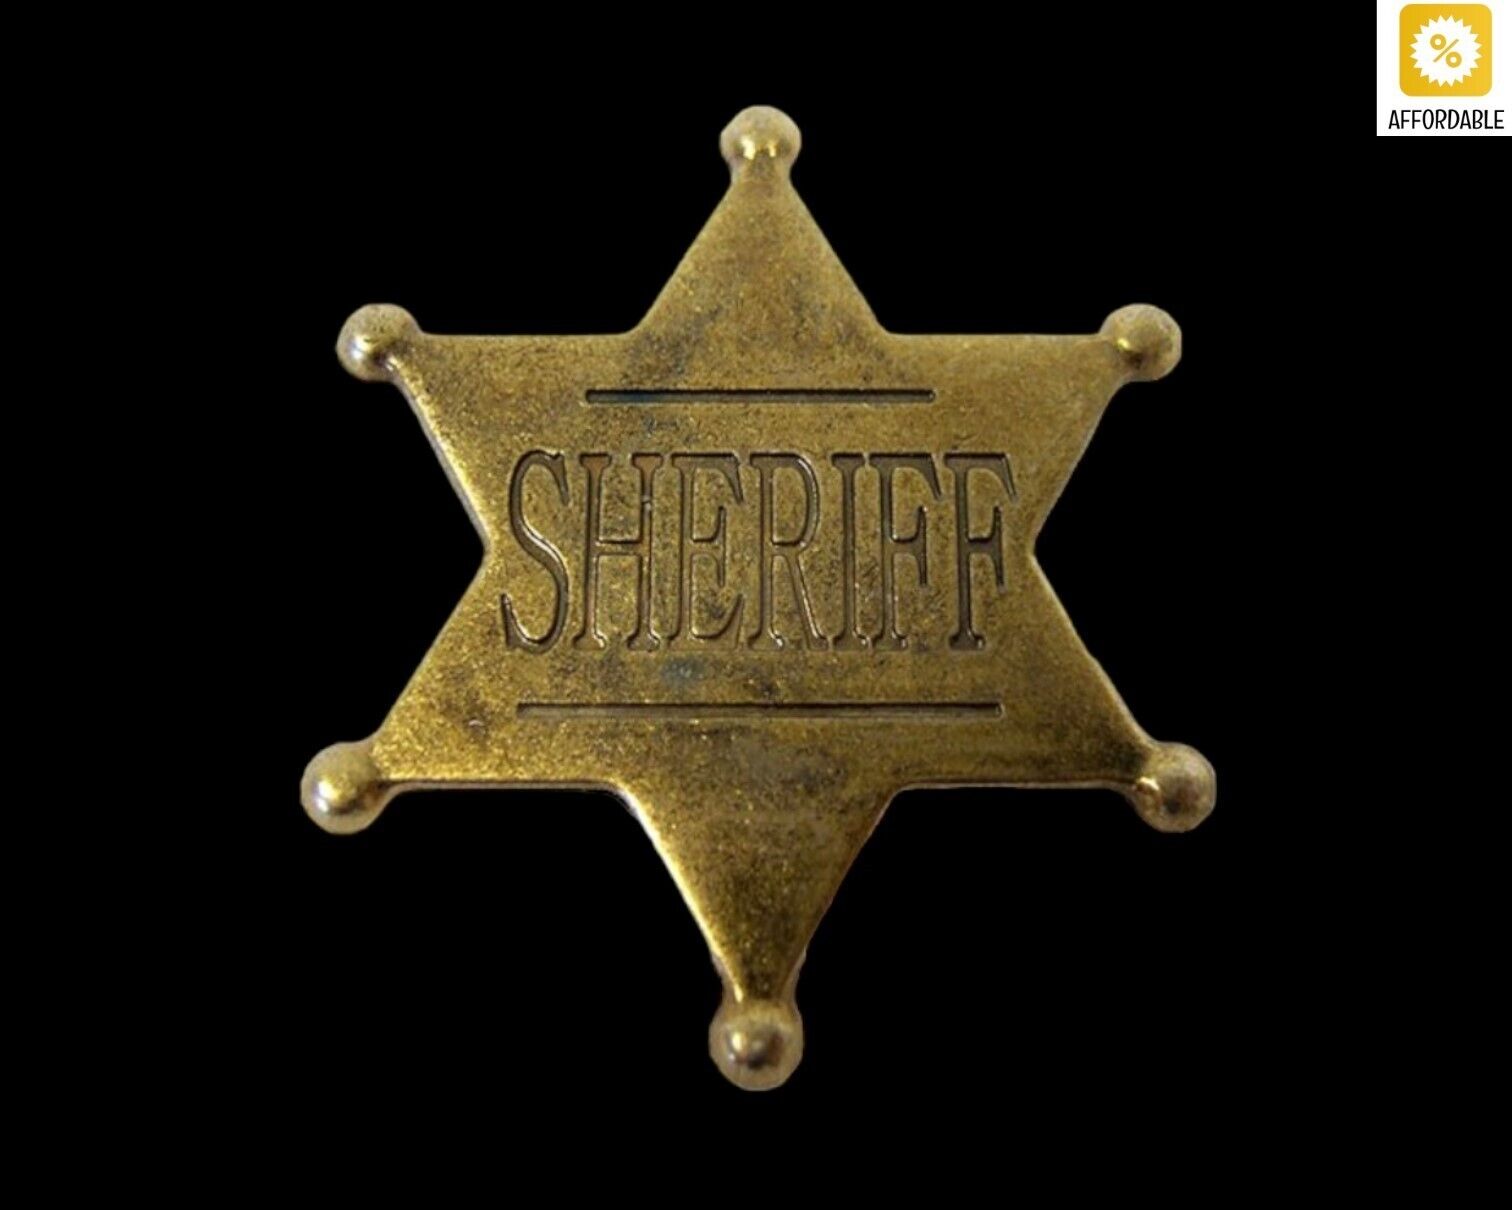 Classic Old West Gold Badge Of Sheriff Replica Aluminium Great For Collectors